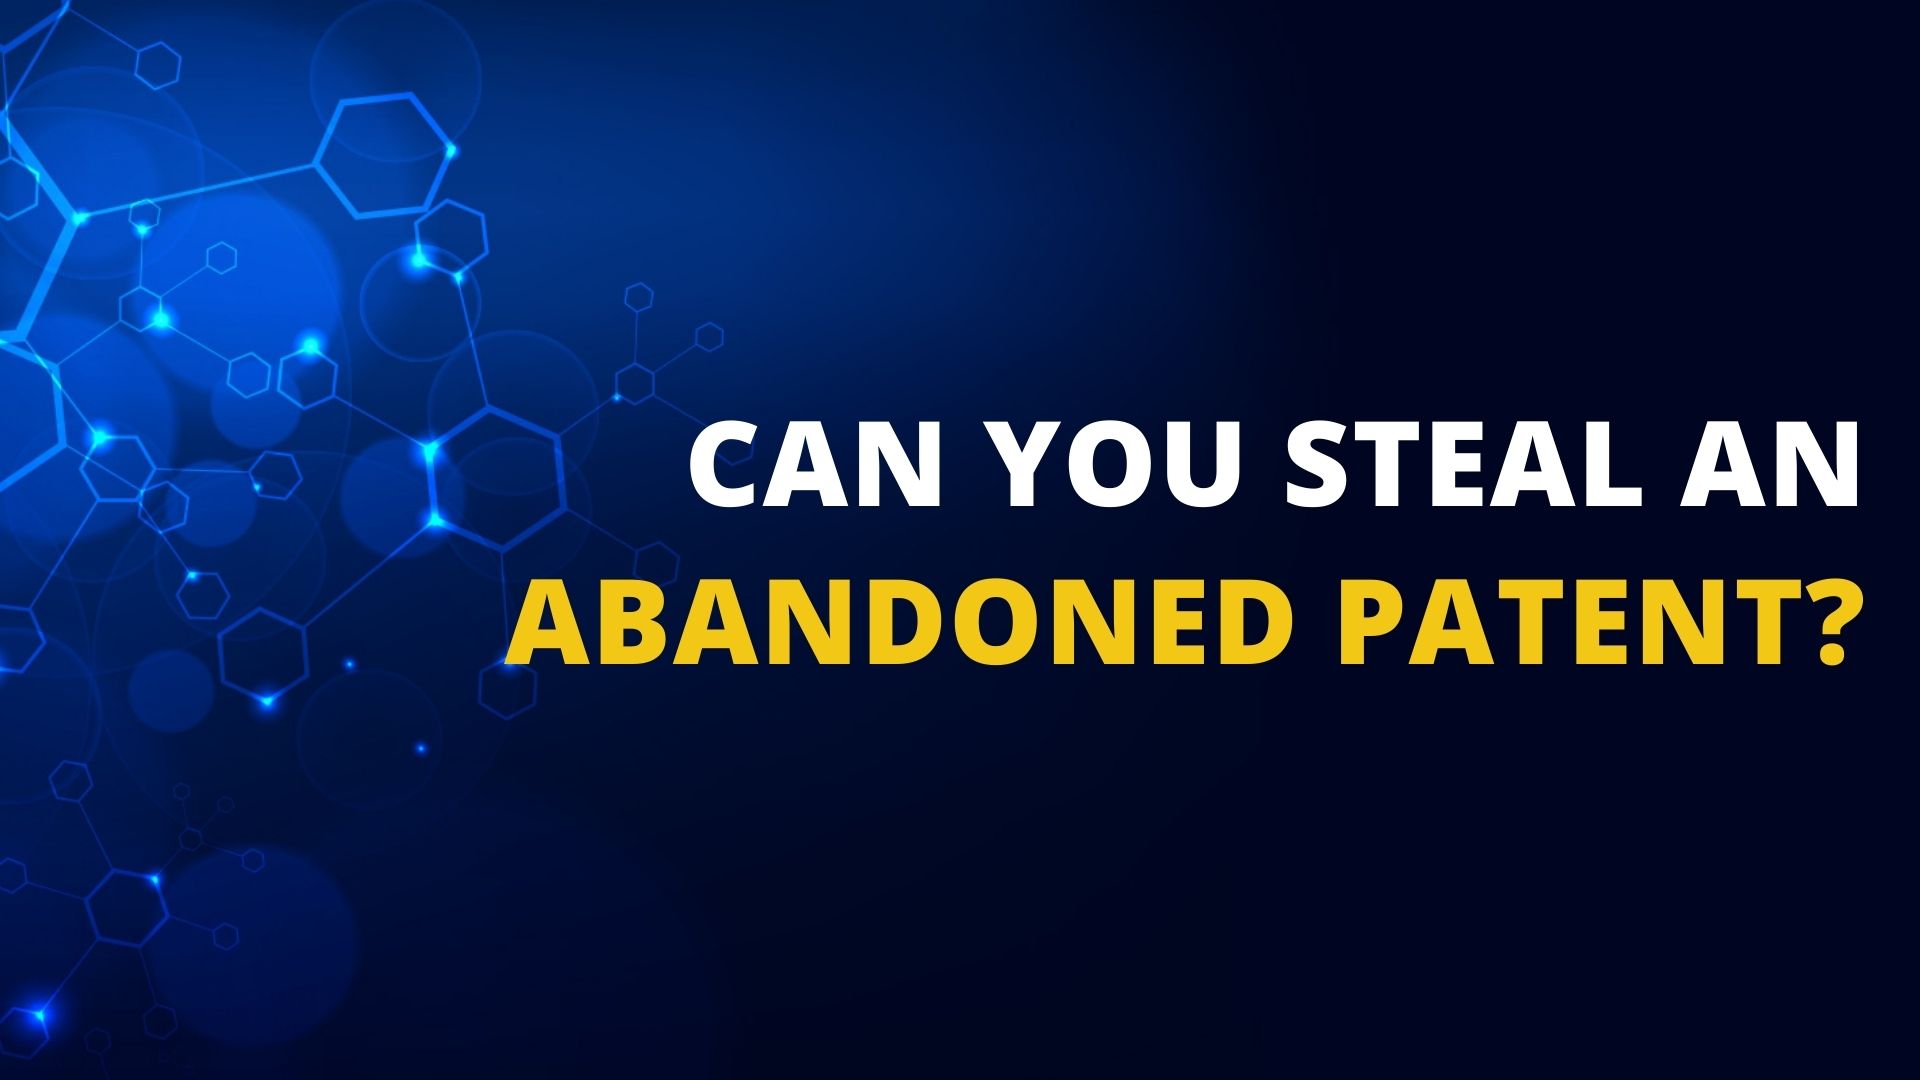 Can You Steal an Abandoned Patent